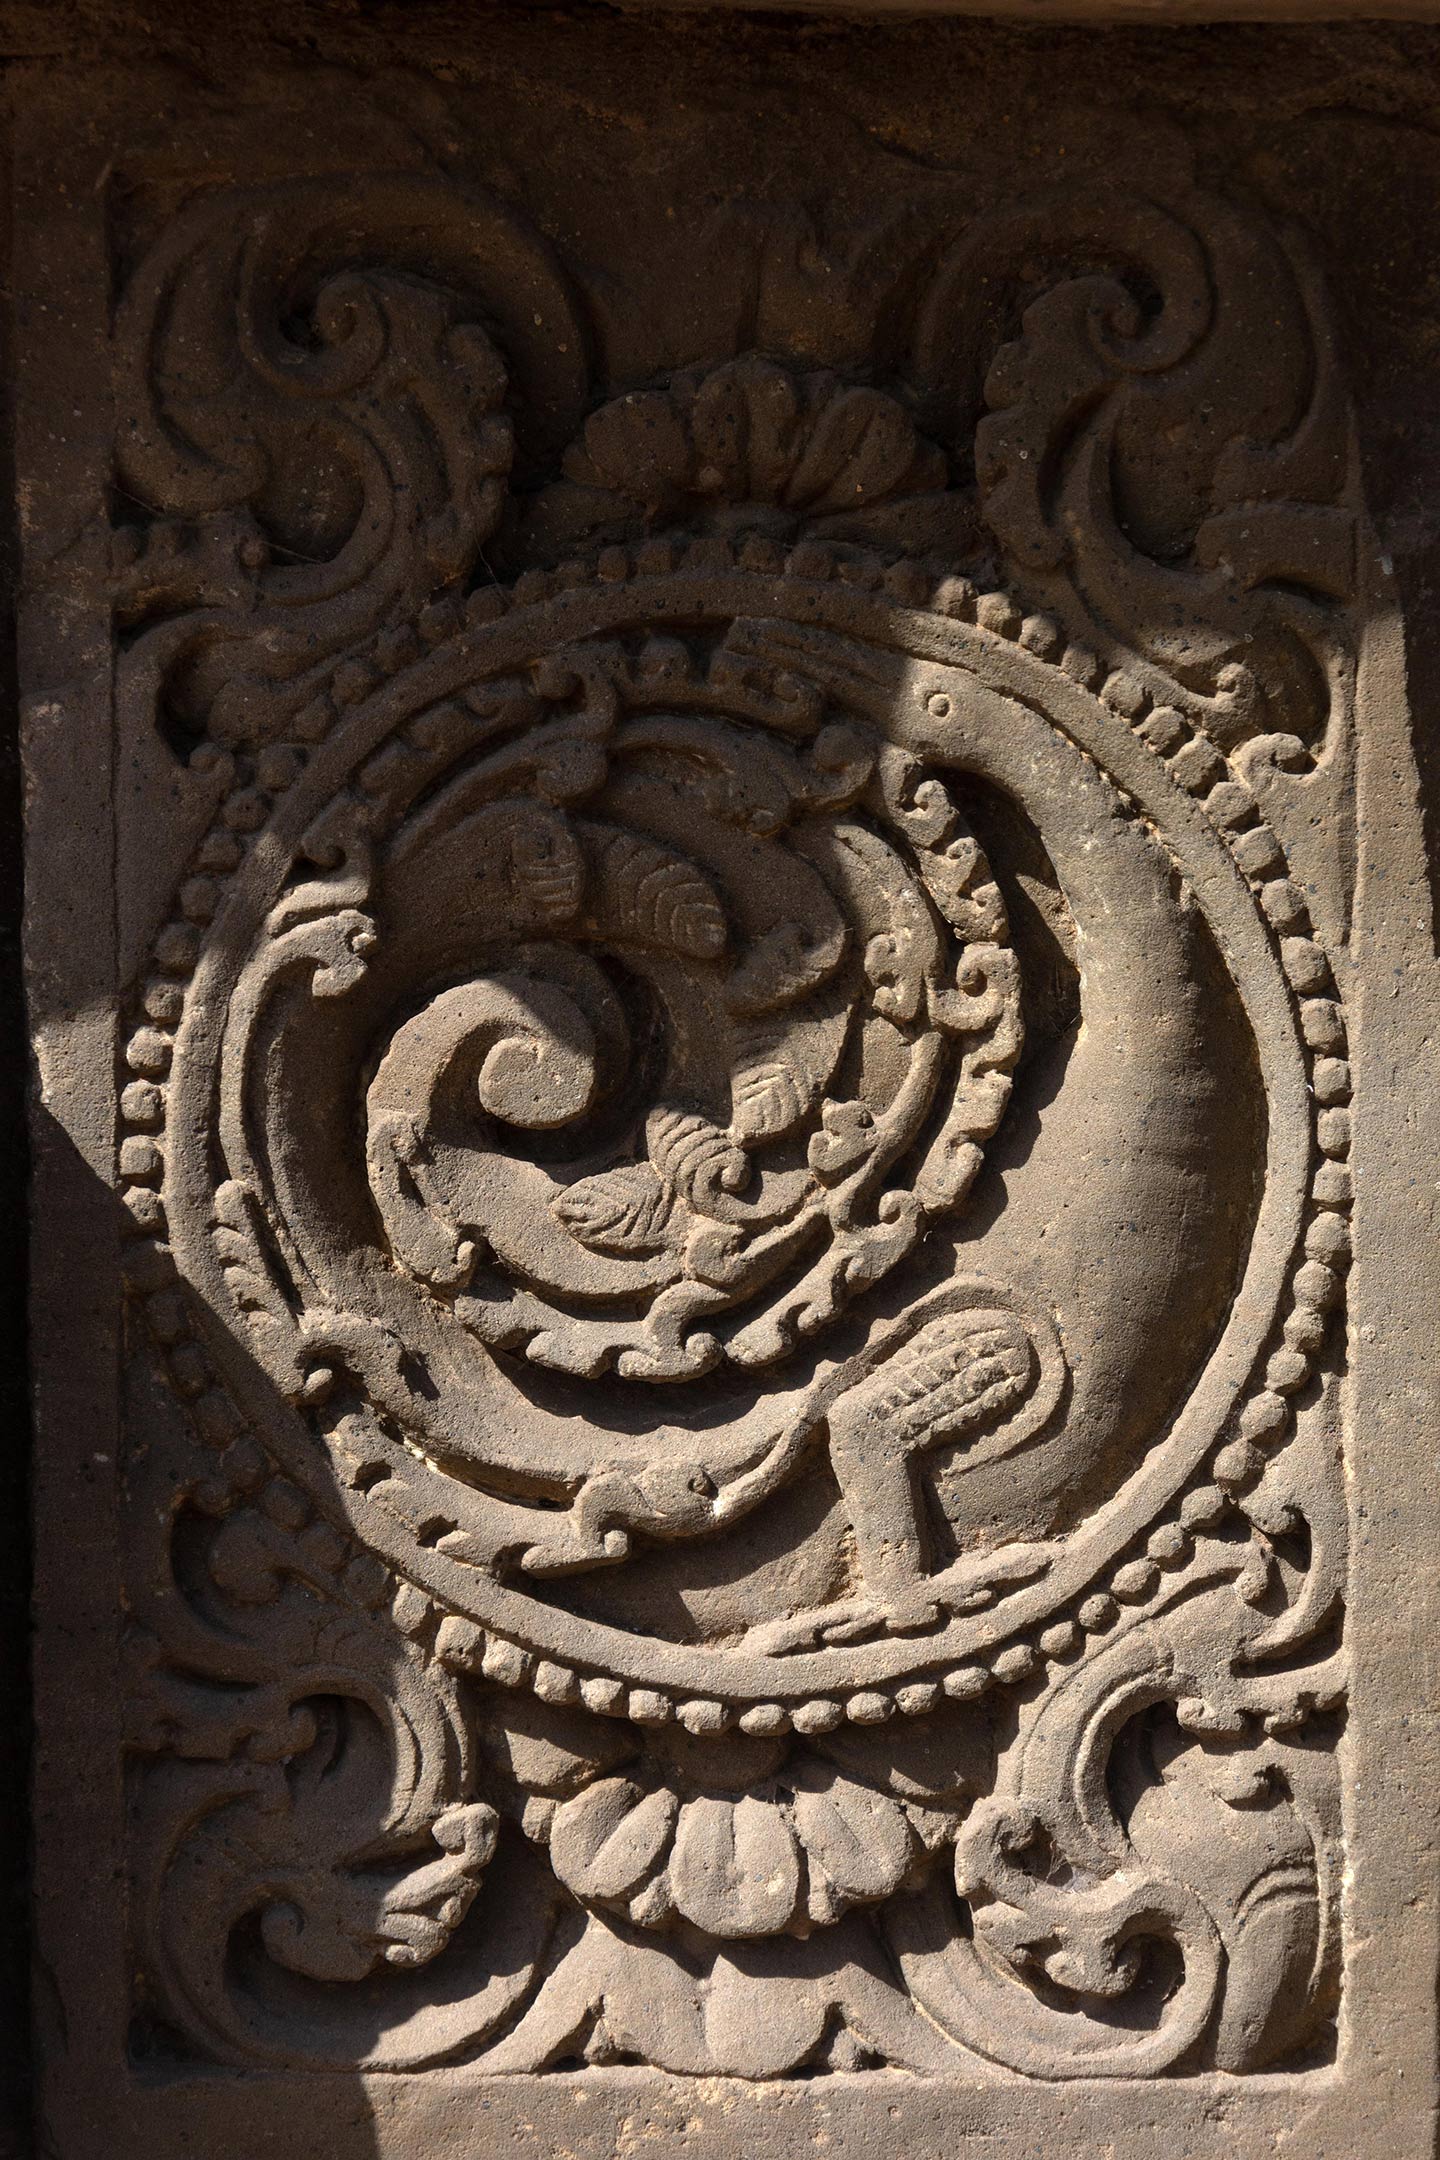 The central artwork of the plaque is in the form of a circular medallion surrounded by a foliage motif. Seen here is a floriated makara with its neck stretched around the medallion and the rear part integrated with flowing creeper motifs. The rest of the plaque is decorated with ardha padma (half lotus) and kalpa lata (creeper) motifs.